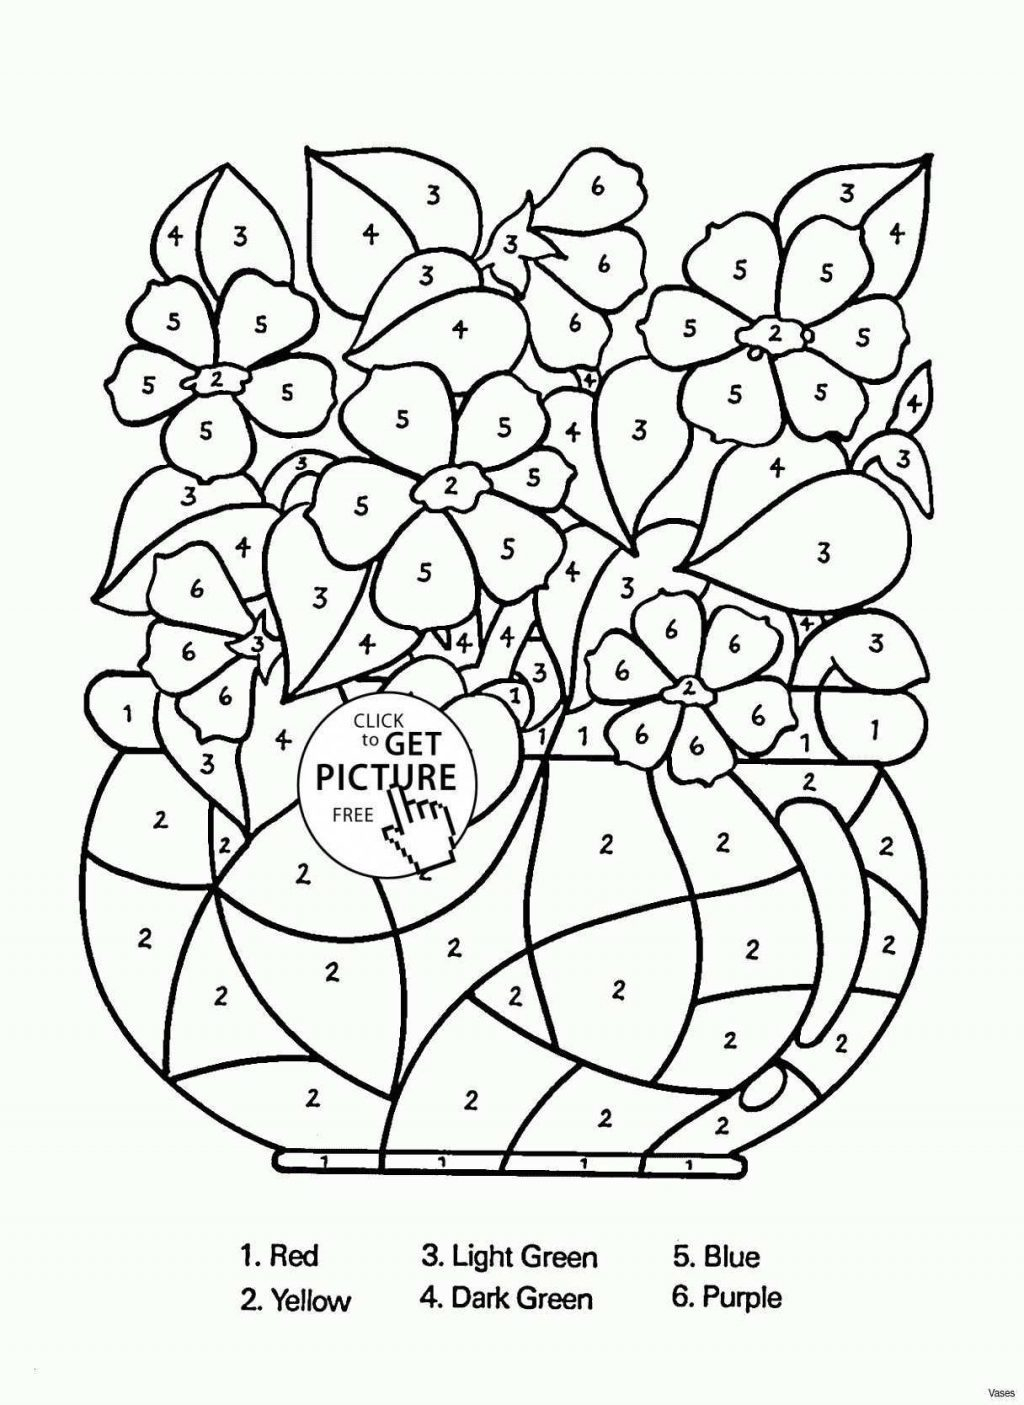 Name Coloring Page Coloring Pages Coloring Pages Make Your Own With Name On It Unique